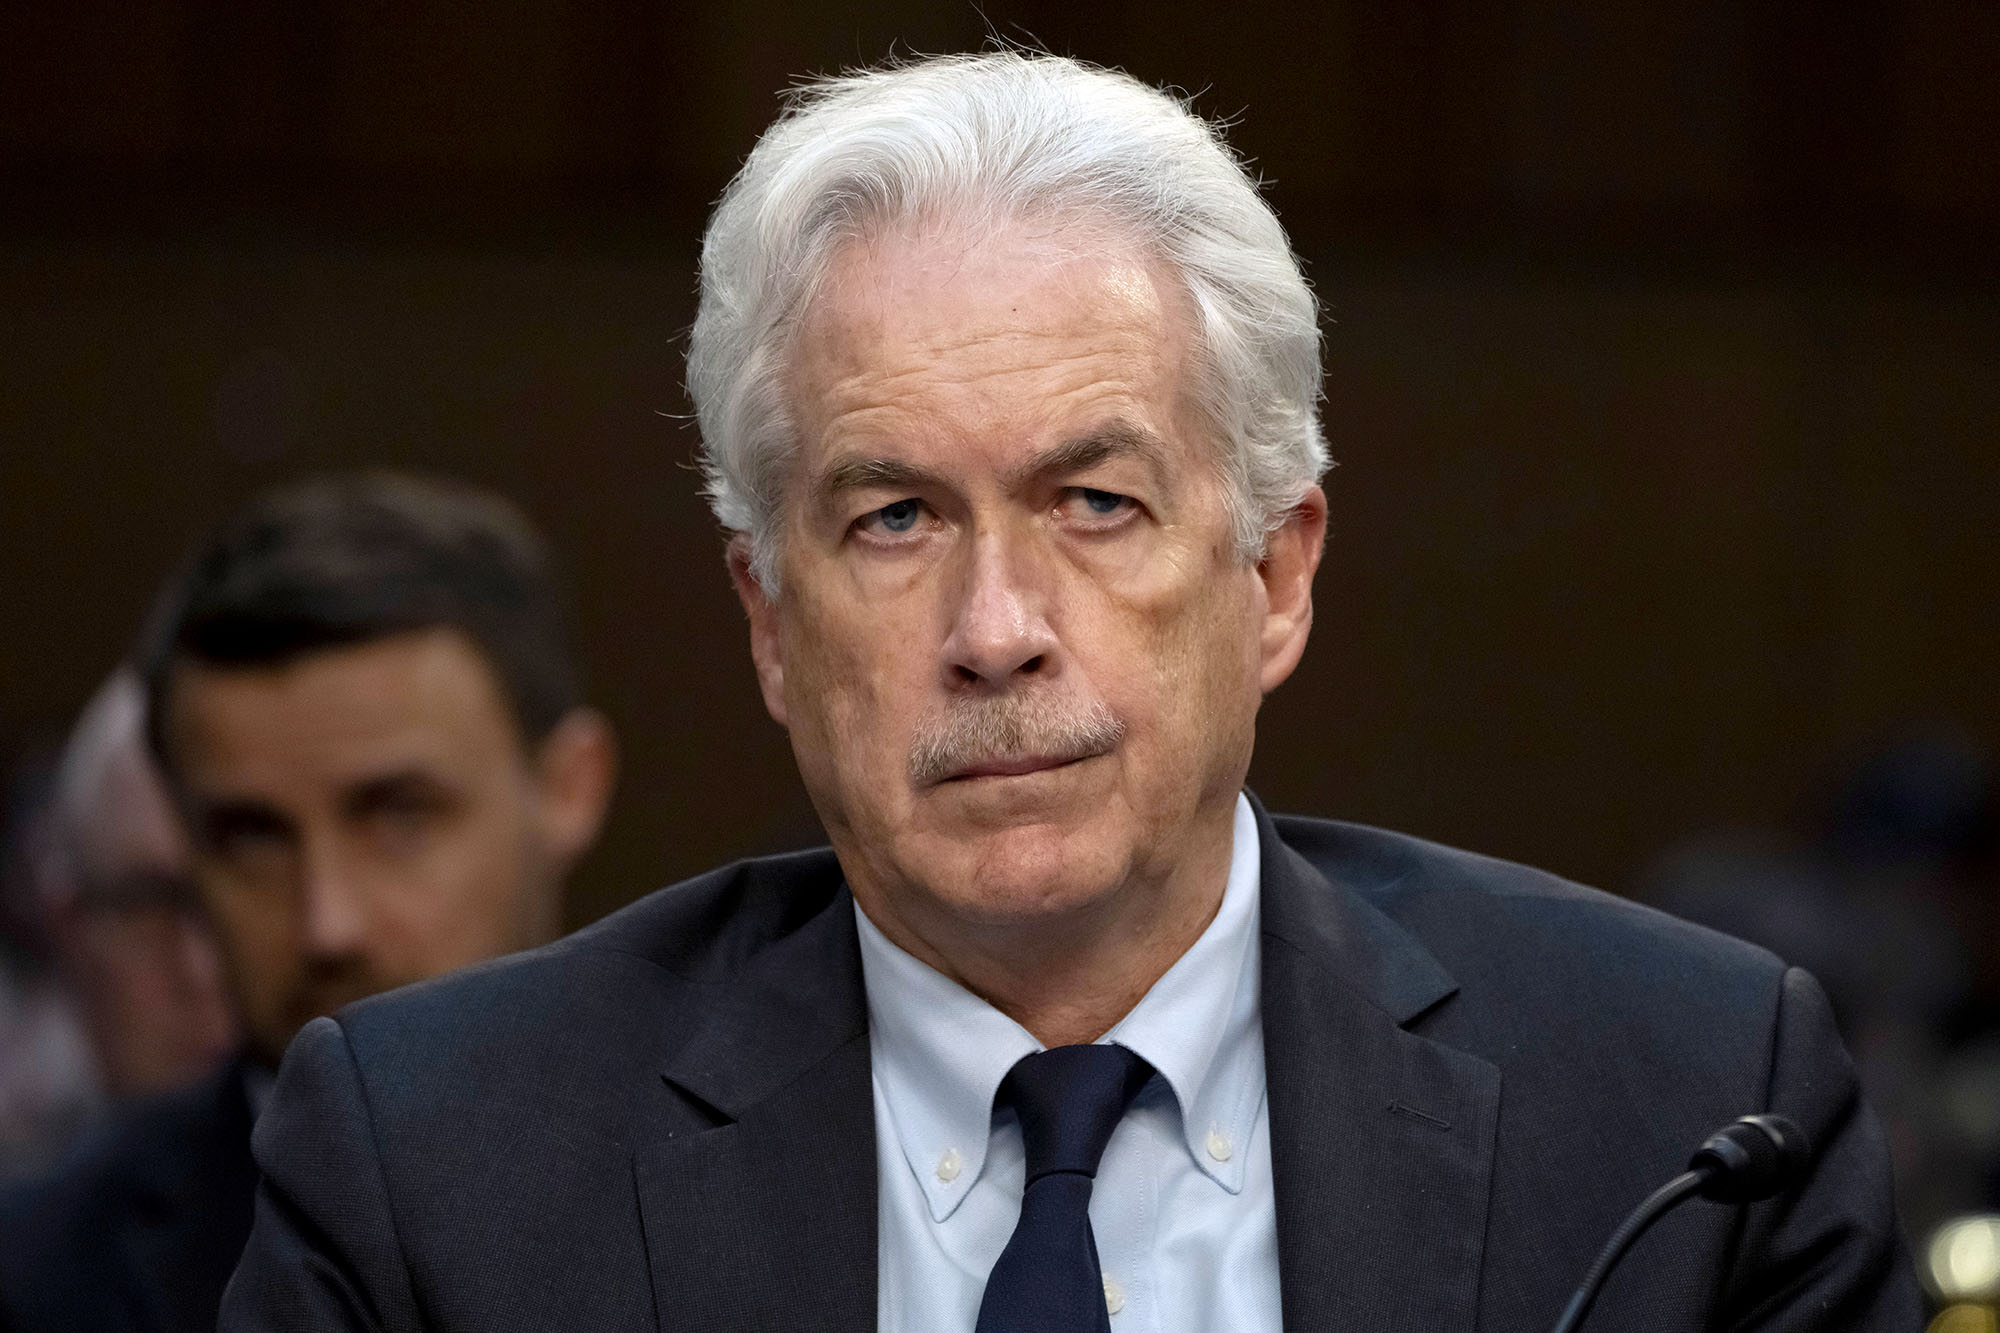 CIA director William Burns attends a hearing of the Senate Intelligence Committee on Capitol Hill, Washington D.C., on March 11.